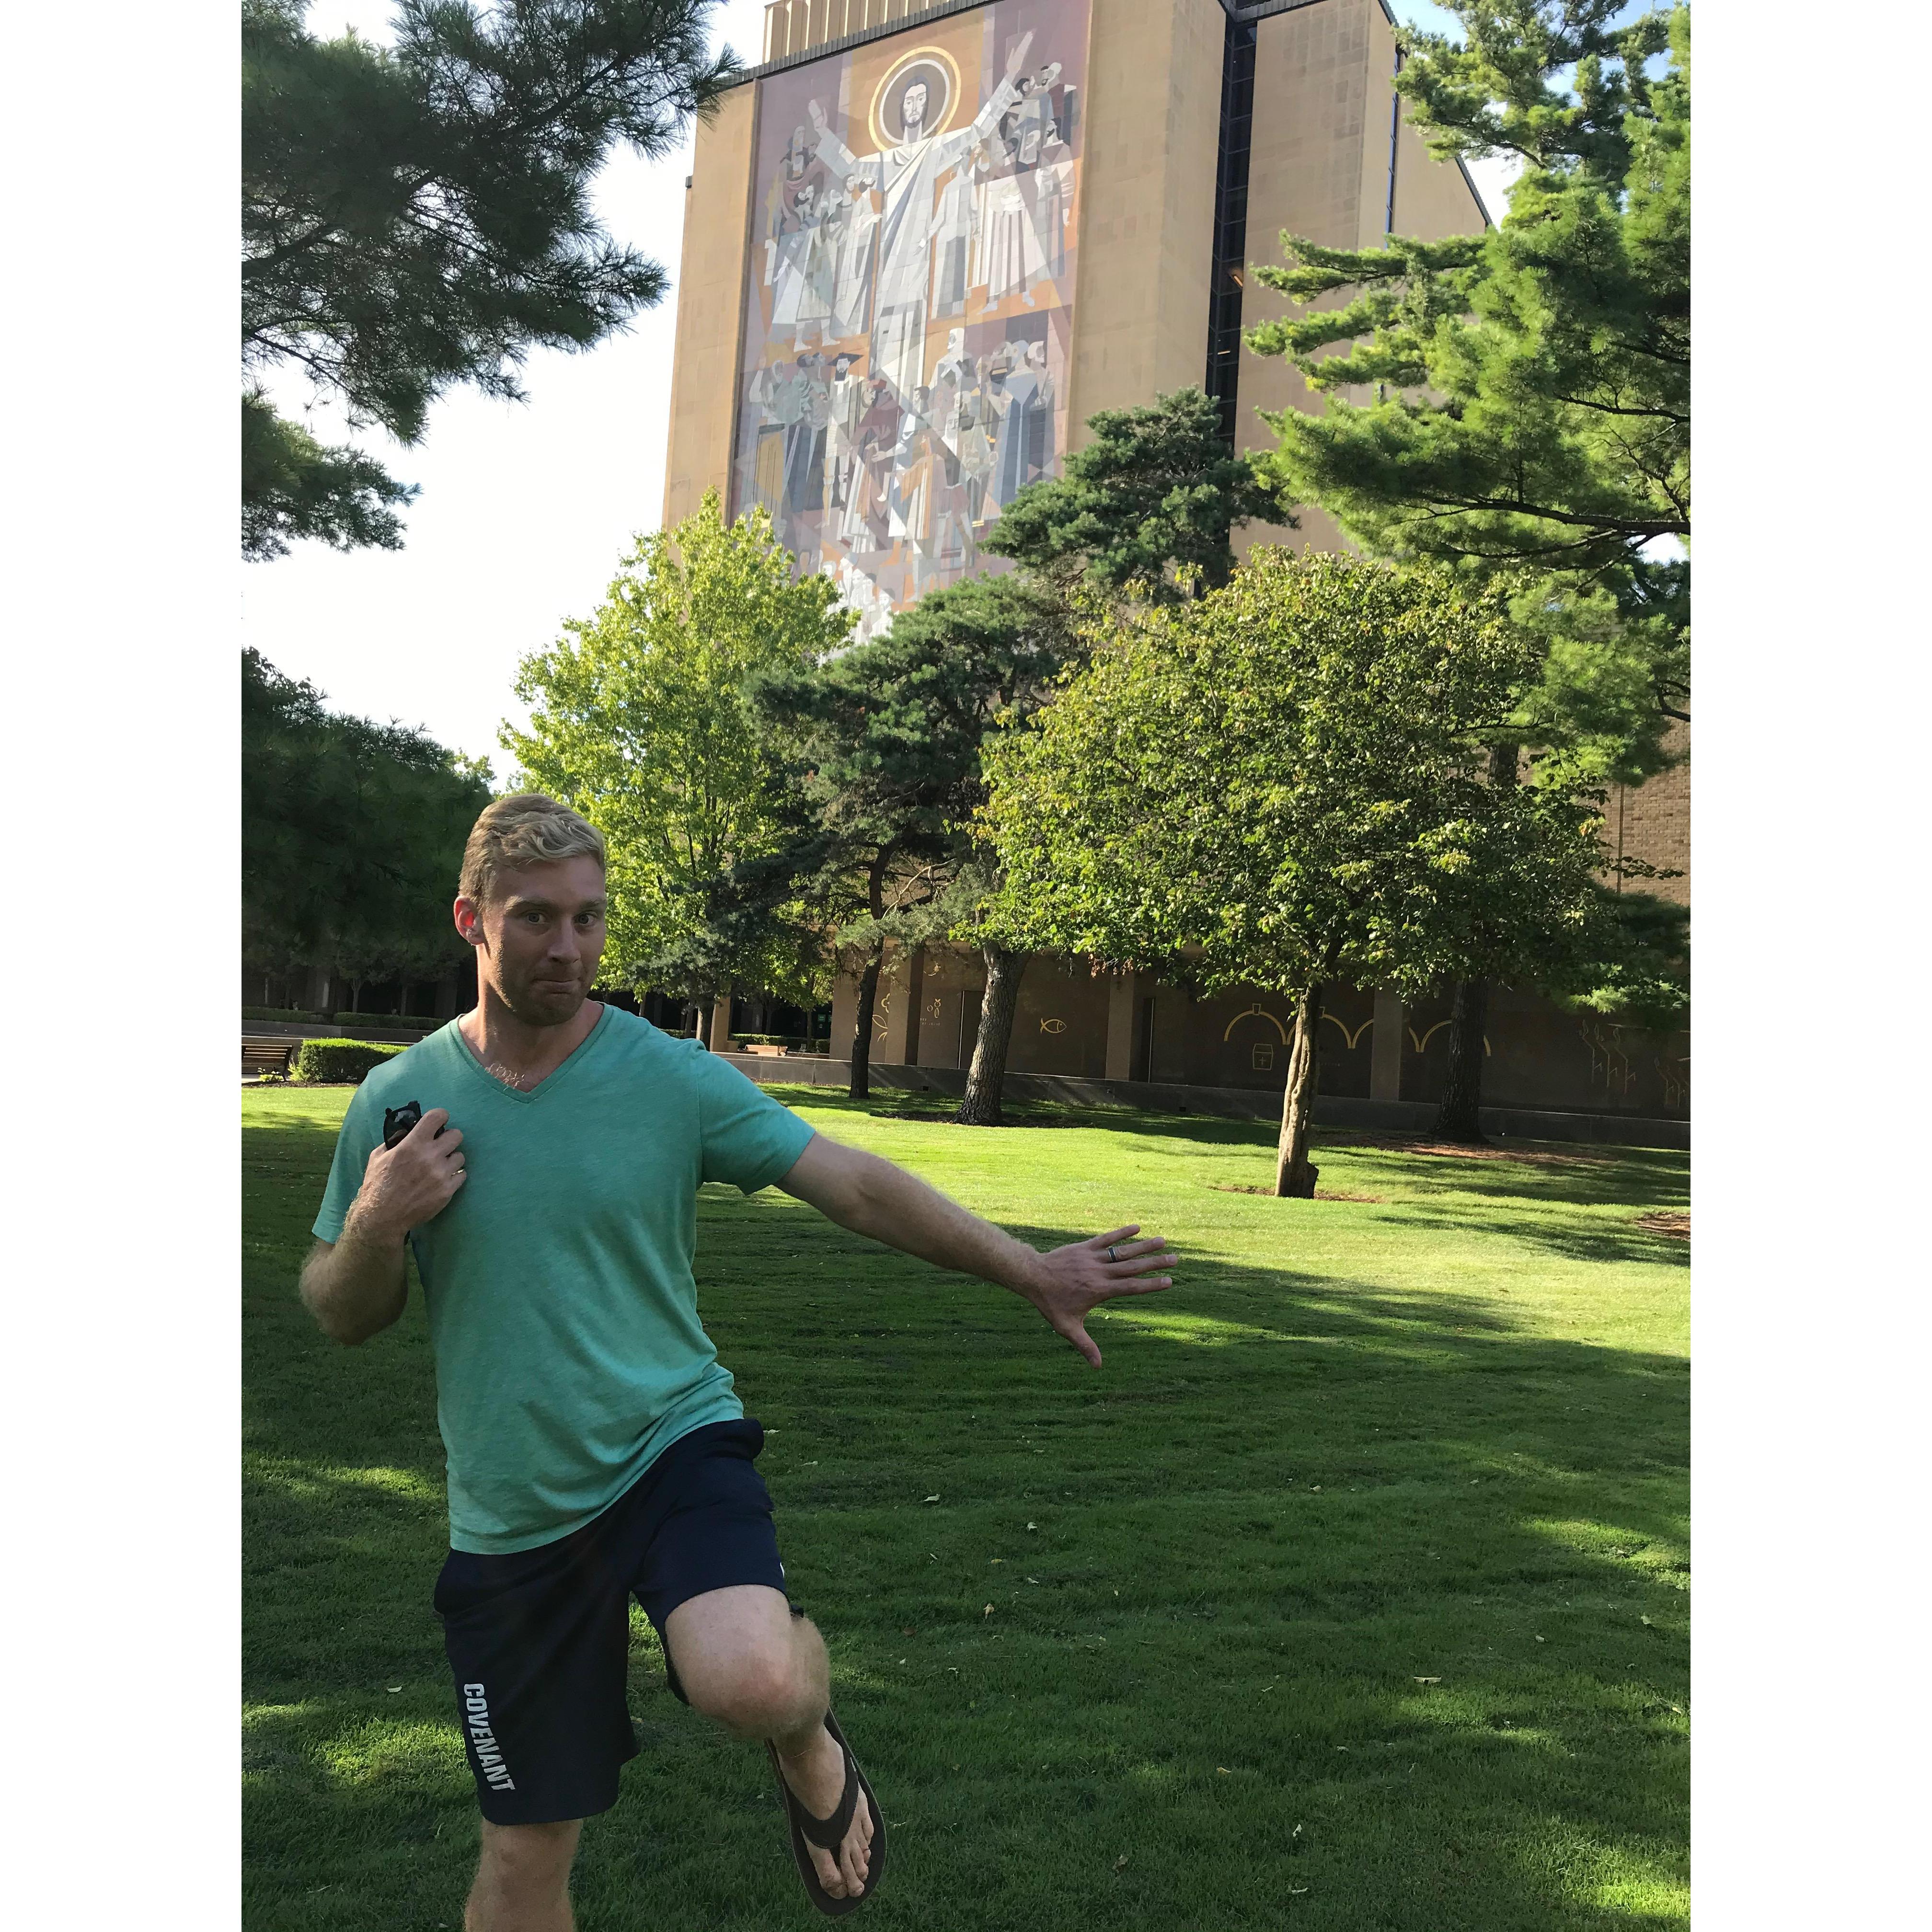 Stopped by Notre Dame to see Touchdown Jesus!